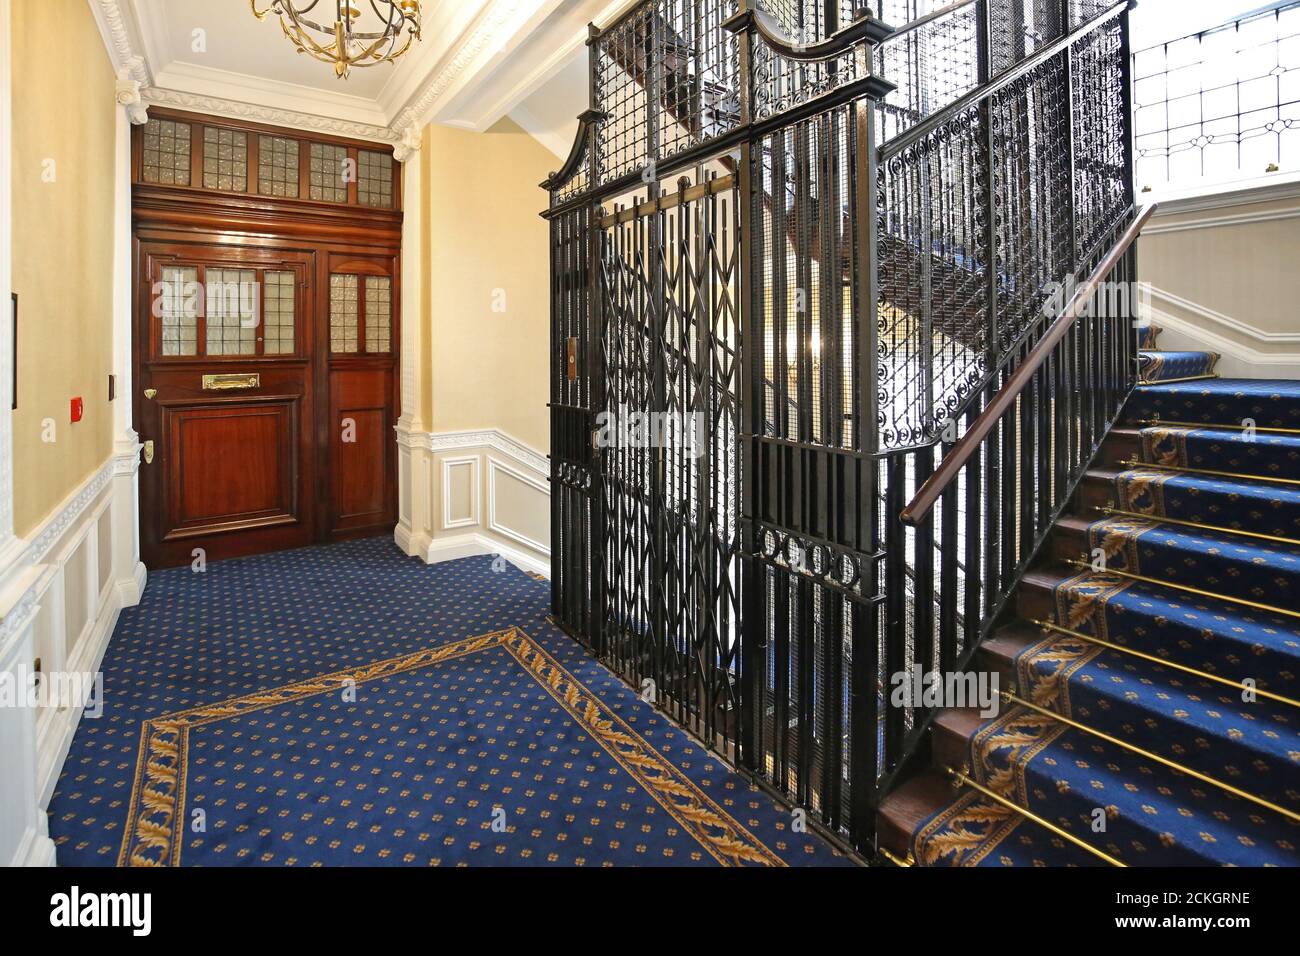 A traditional metal caged lift in the stairwell of a central London apartment block. Newly refurbished, shows new carpet, stair rails and ornate doors Stock Photo